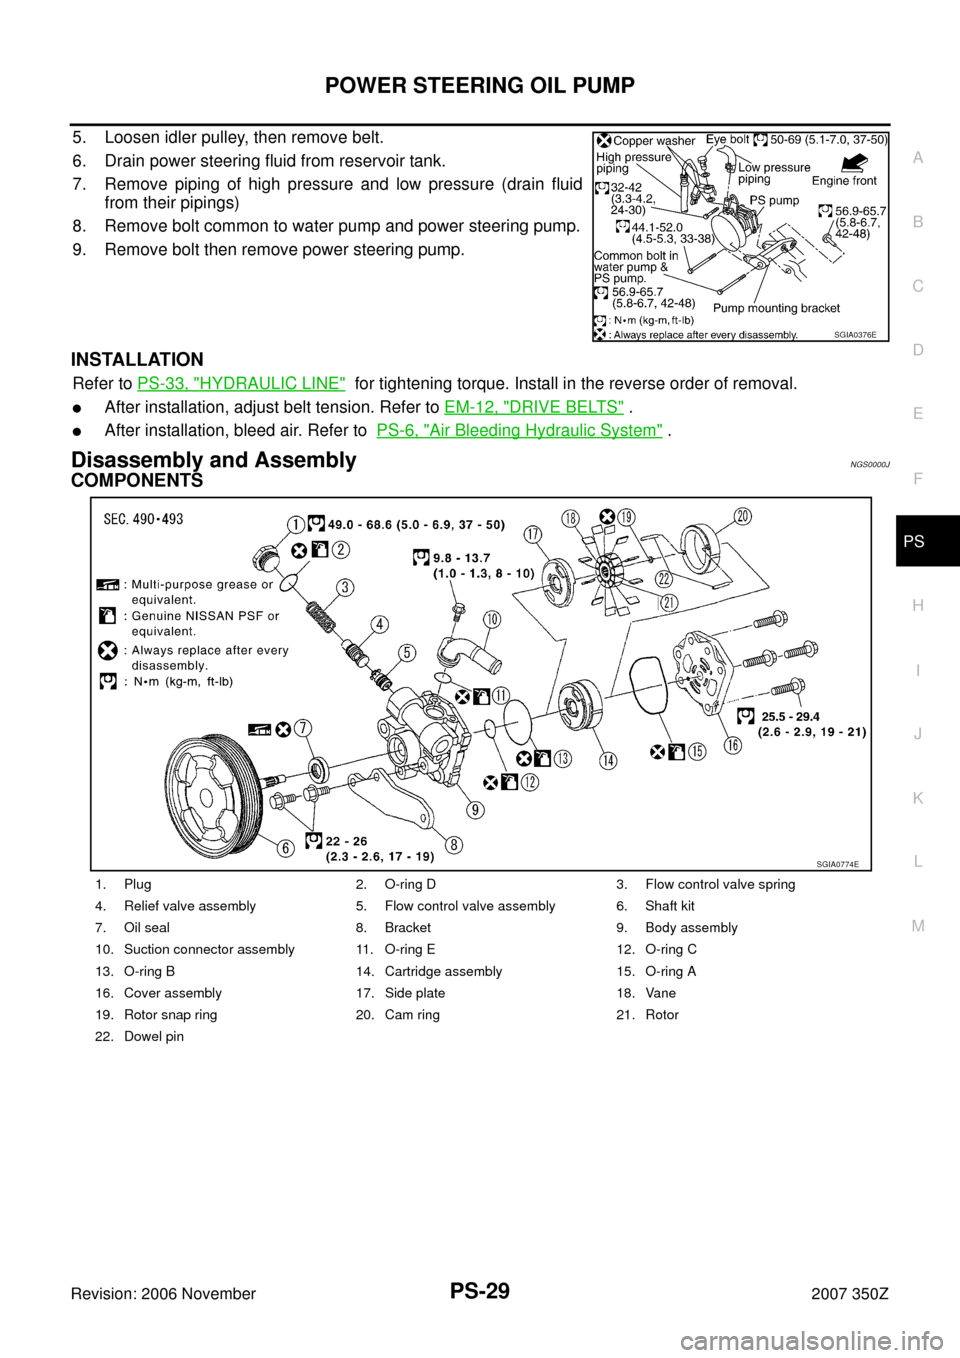 NISSAN 350Z 2007 Z33 Power Steering System Owners Manual POWER STEERING OIL PUMP
PS-29
C
D
E
F
H
I
J
K
L
MA
B
PS
Revision: 2006 November2007 350Z
5. Loosen idler pulley, then remove belt.
6. Drain power steering fluid from reservoir tank.
7. Remove piping o